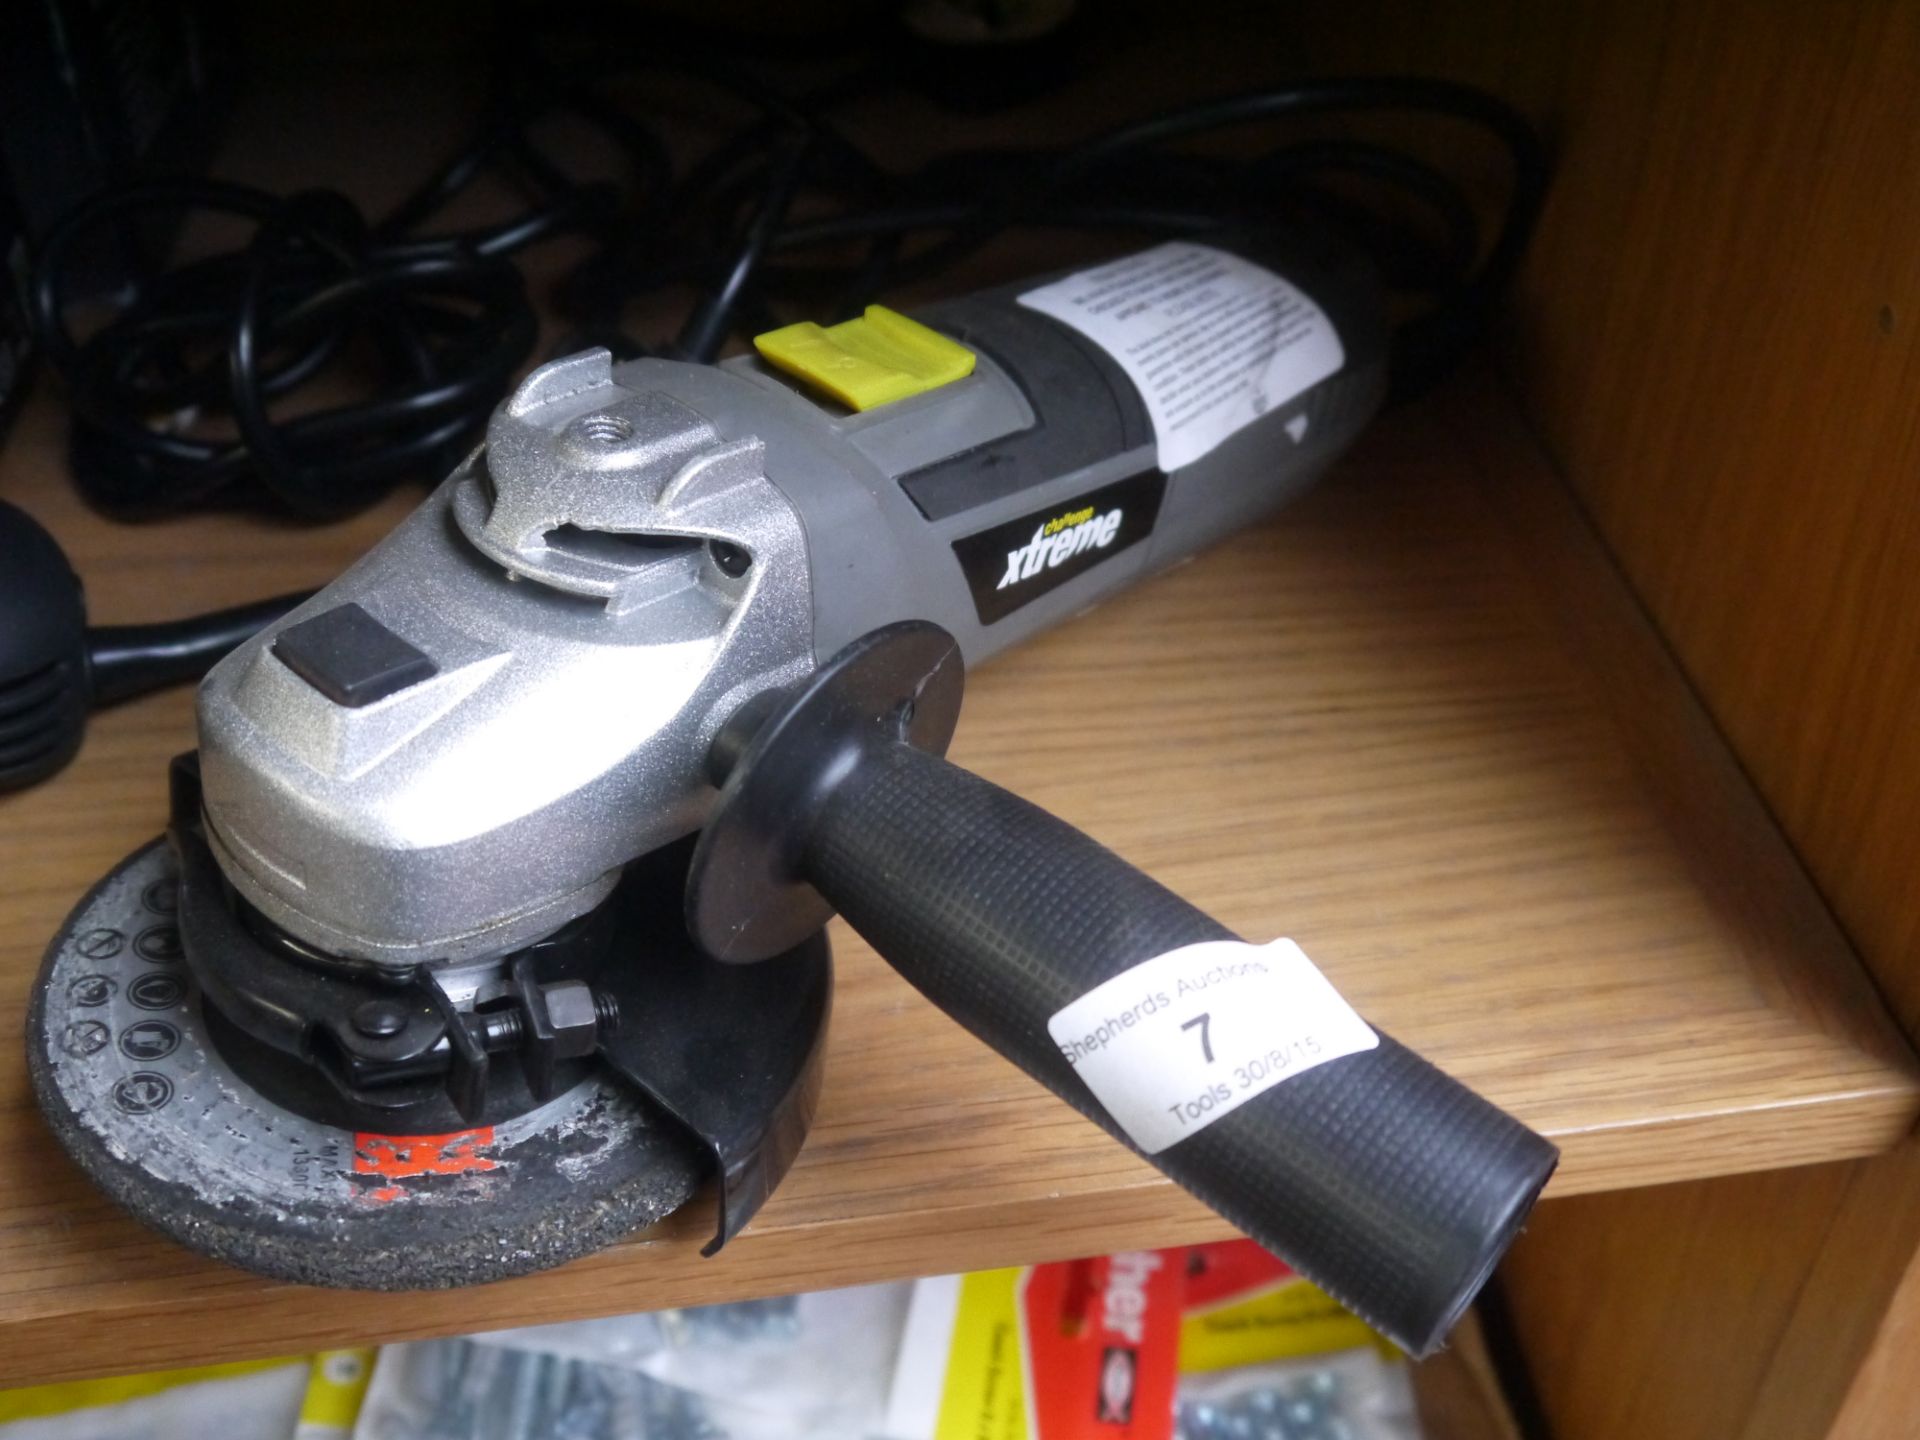 Challenge Xtreme 750W Angle Grinder. Tested working and boxed.